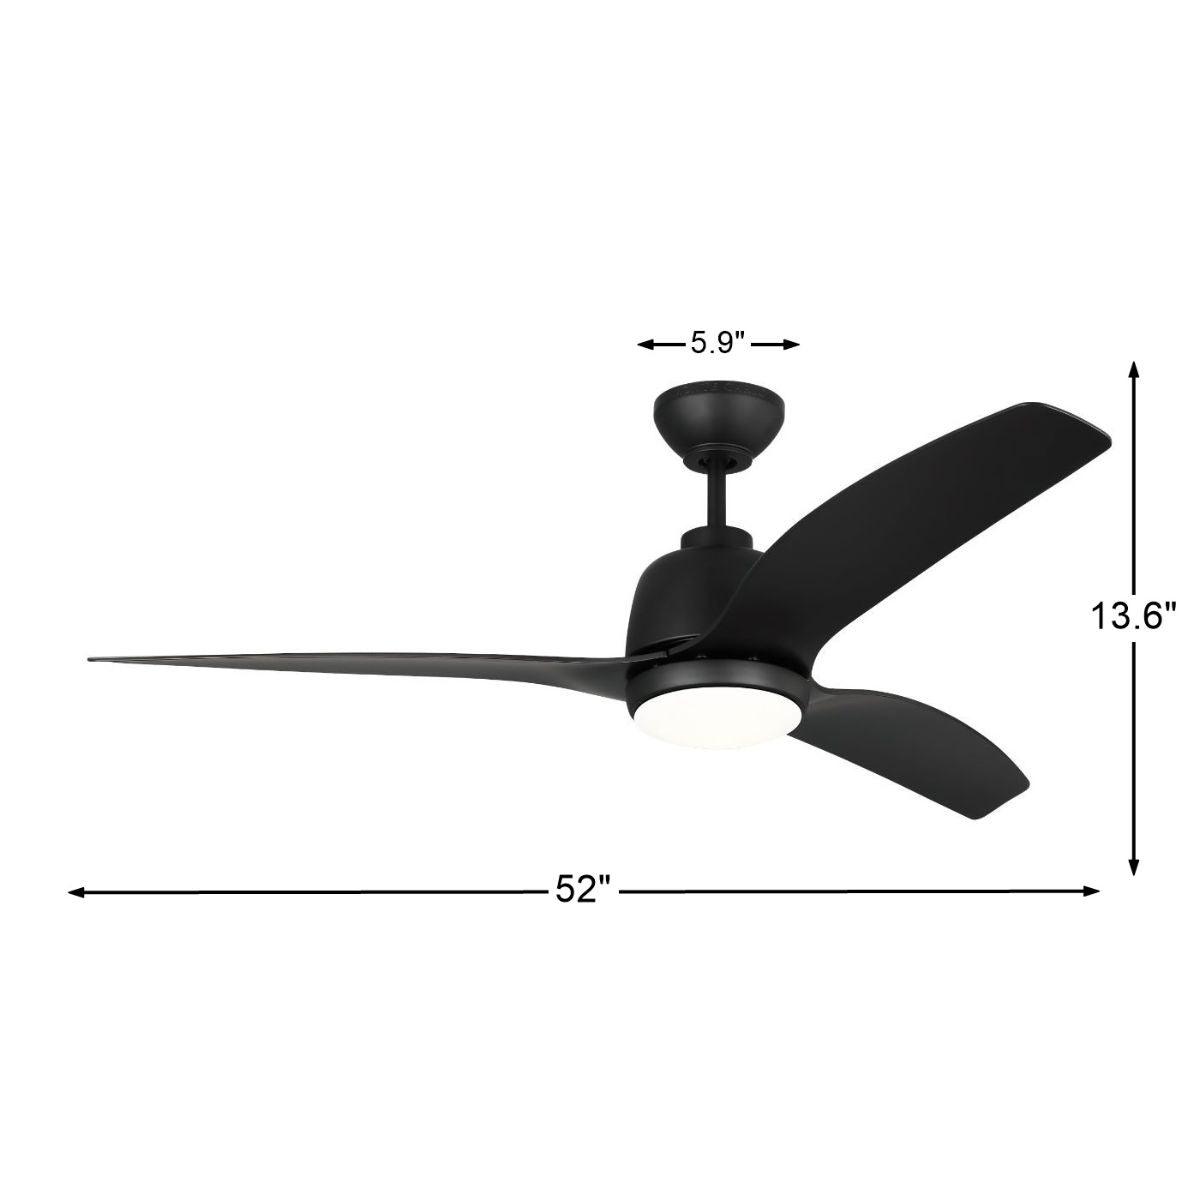 Avila Coastal 54 Inch Midnight Black Outdoor Ceiling Fan With Light And Remote, Marine Grade - Bees Lighting